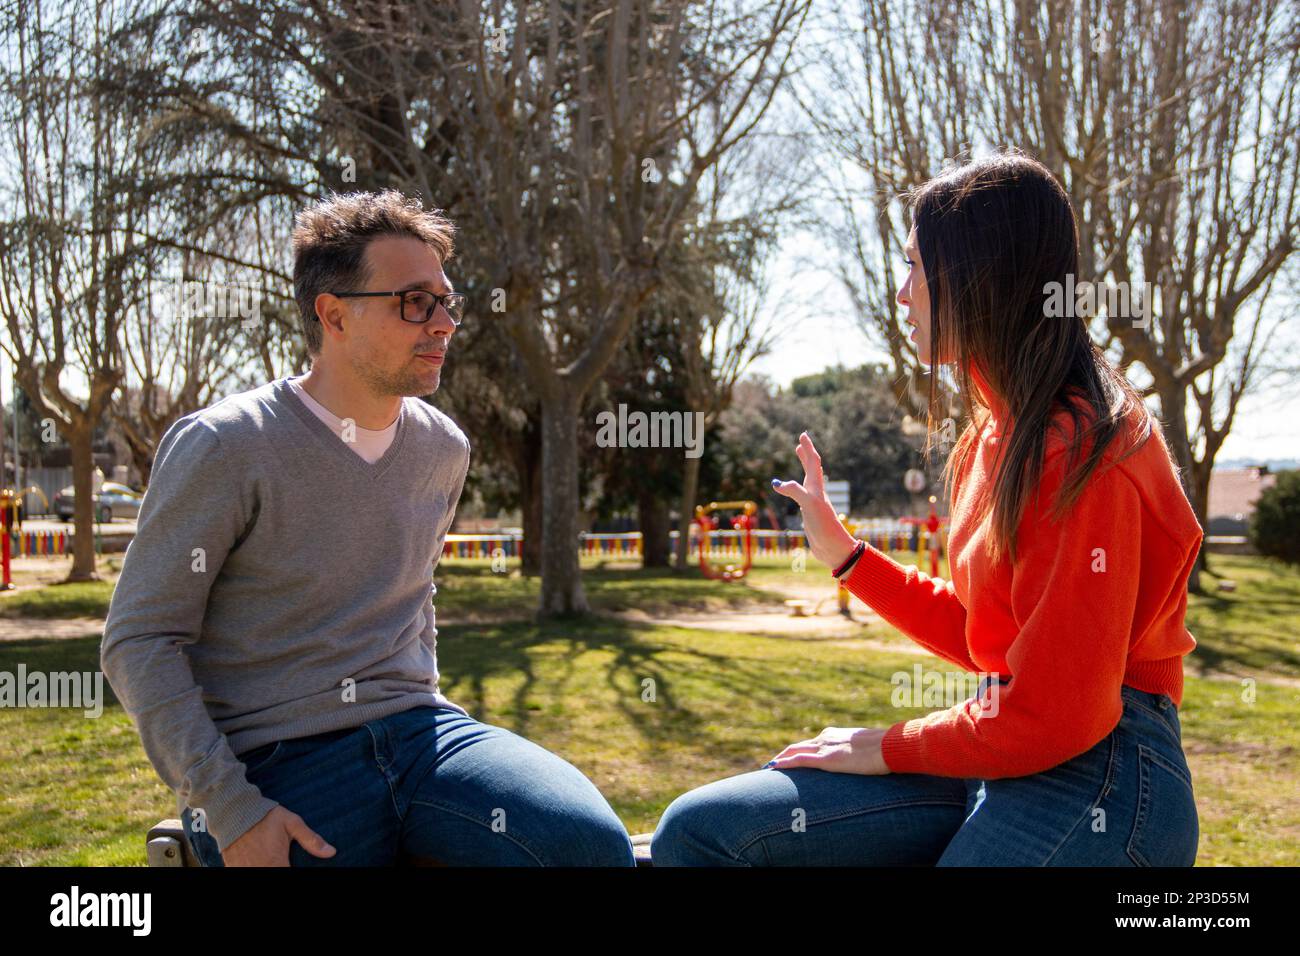 Couple of a mature man and a young woman, chatting and sharing their time, in a garden on a sunny day Stock Photo